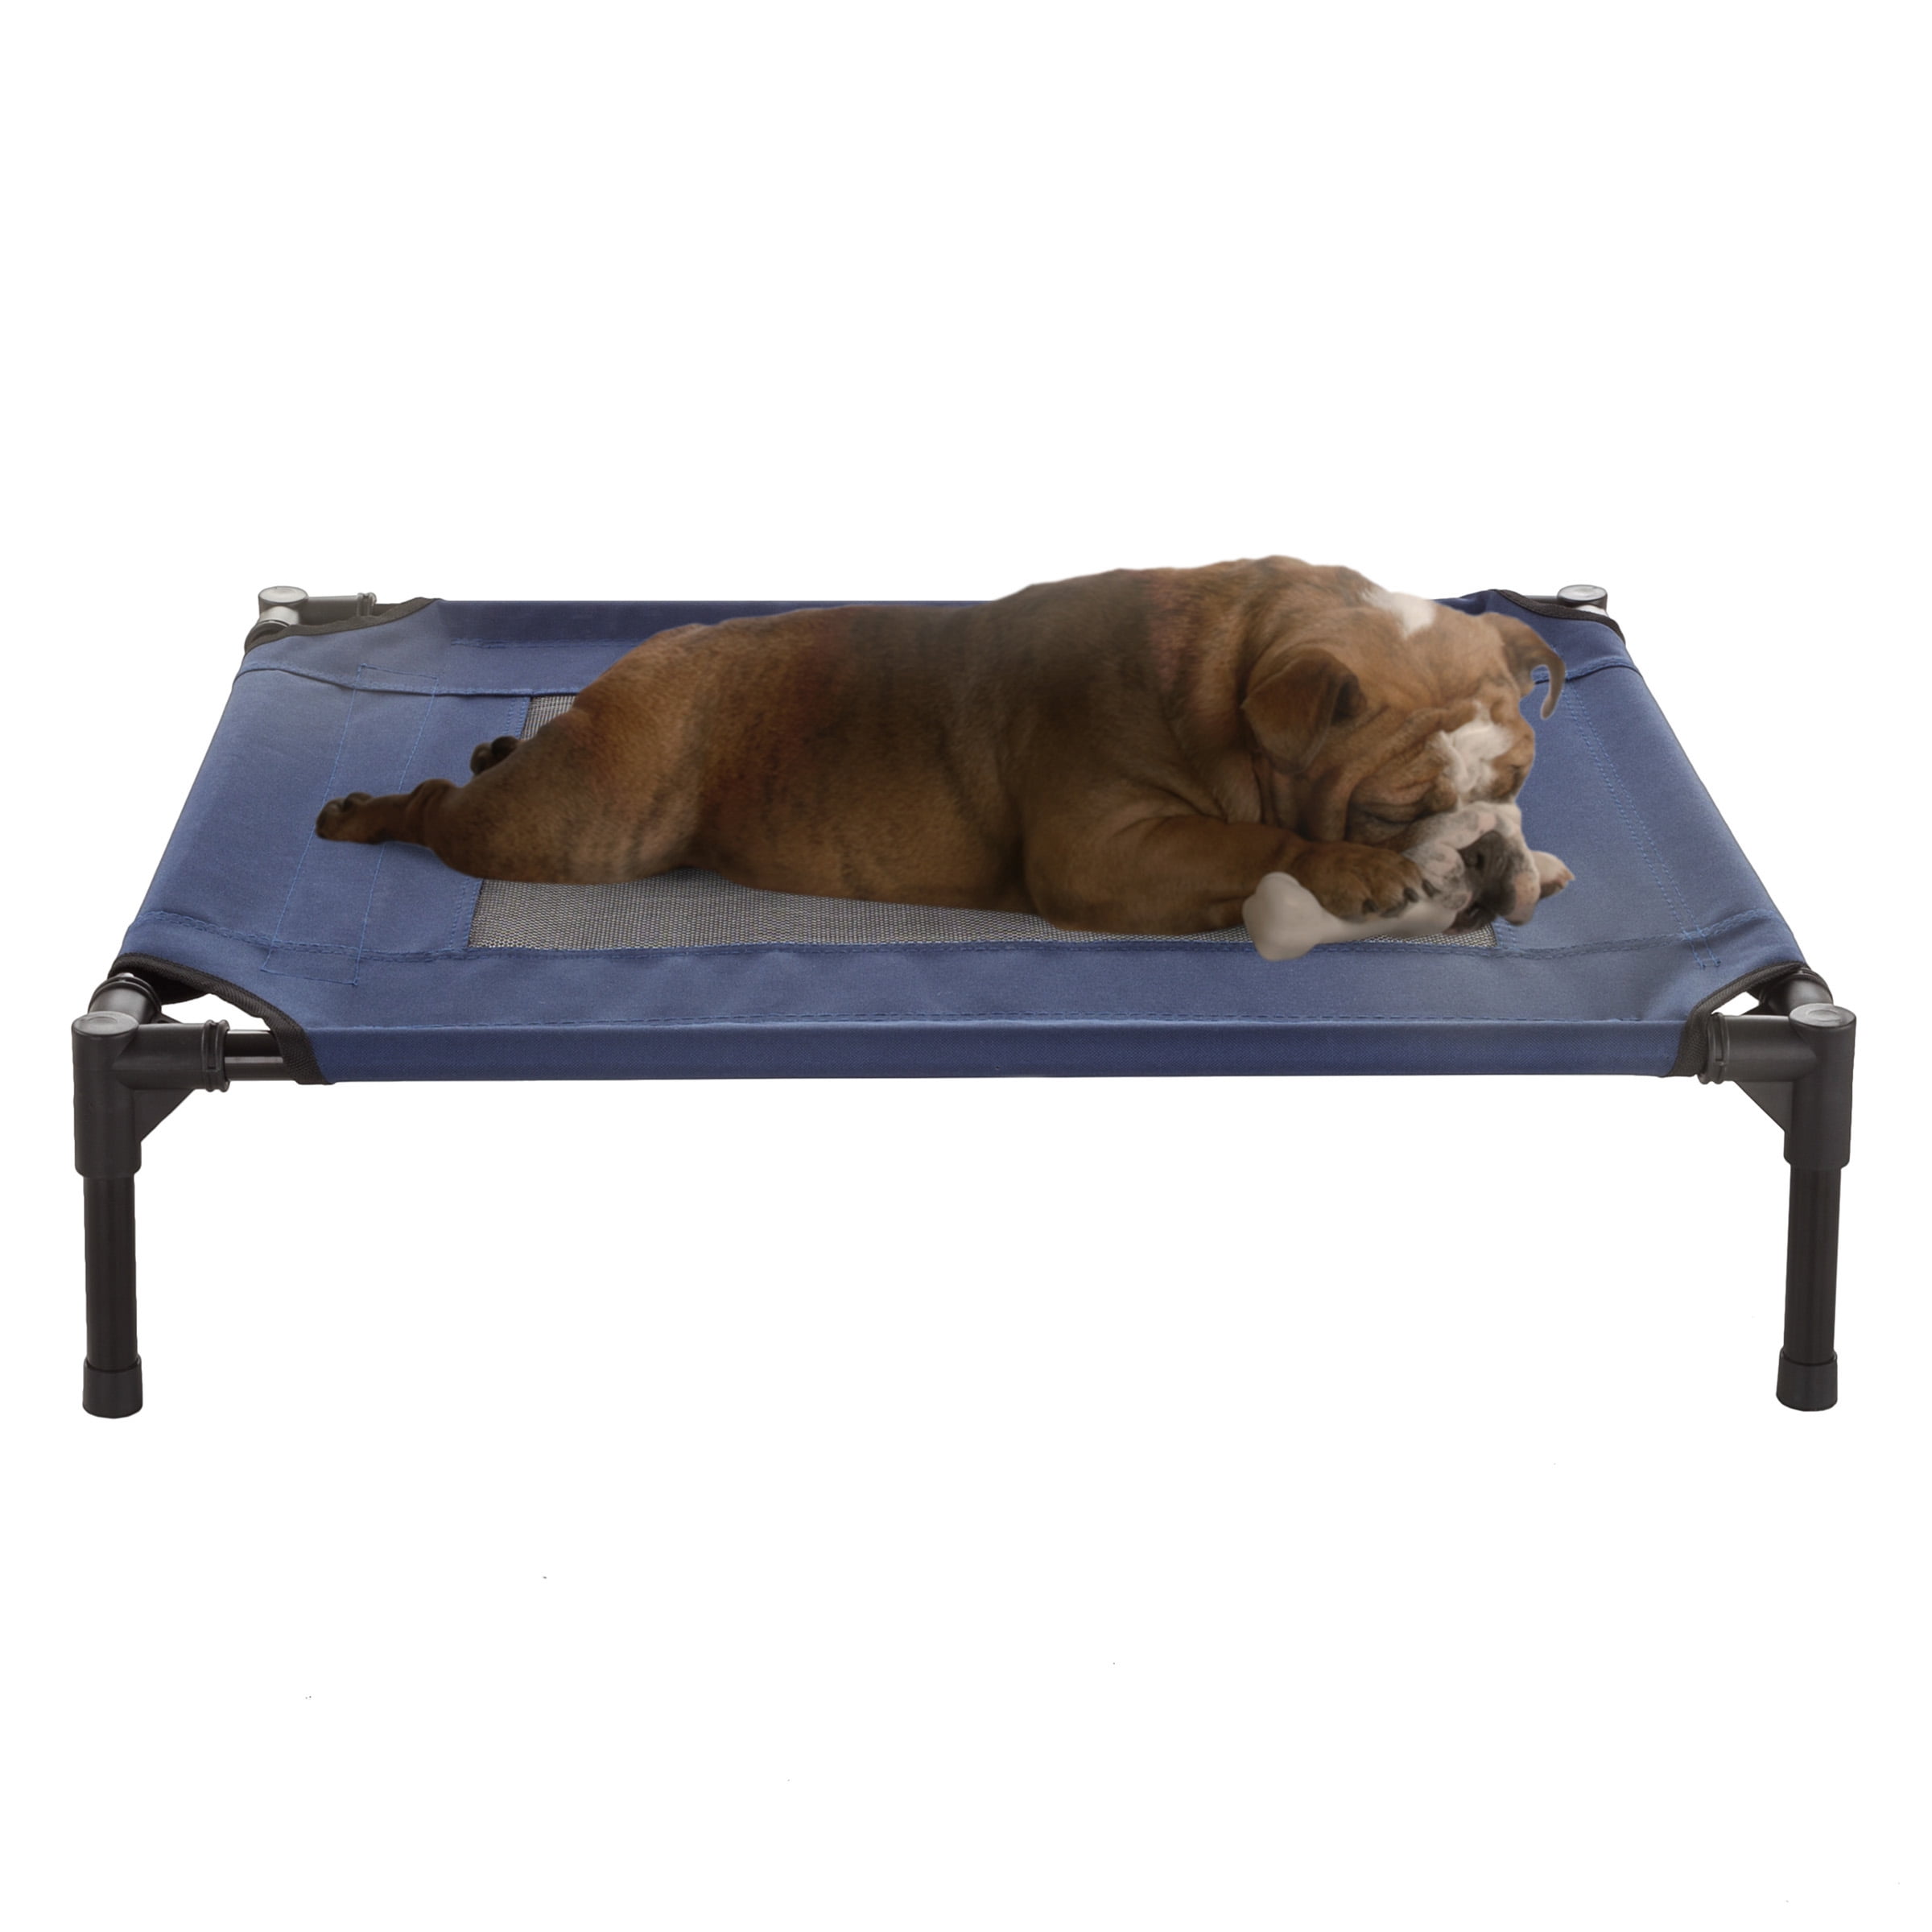 Elevated Dog Bed - 30x24-Inch Portable Pet Bed with Non-Slip Feet ...